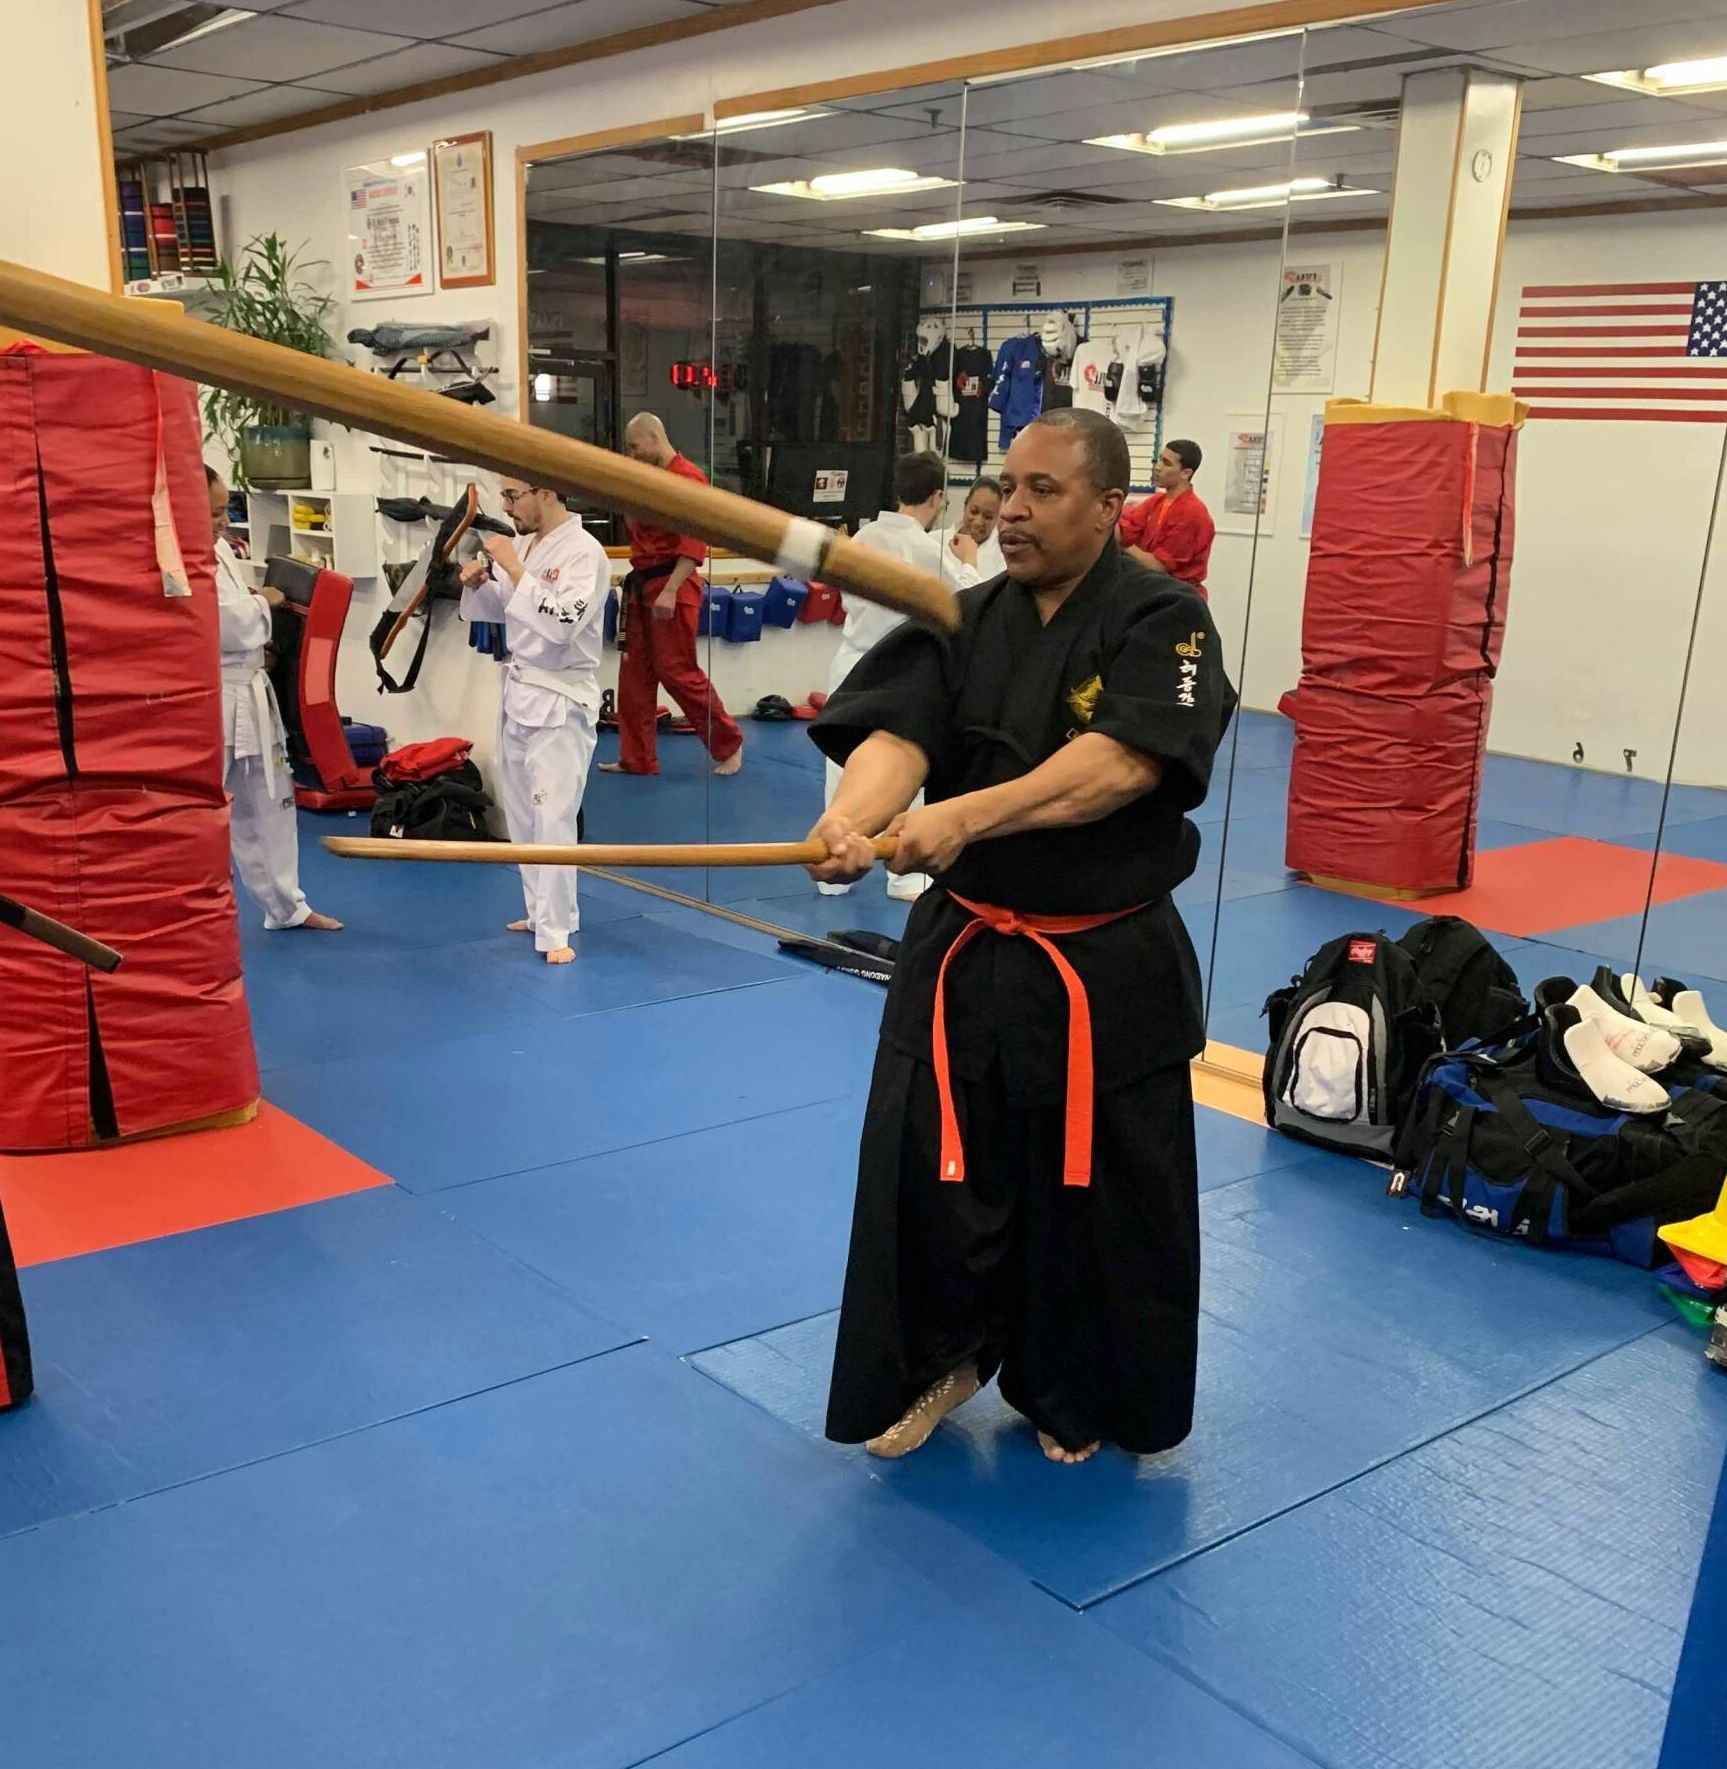 a man in a black karate uniform is holding a large wooden stick